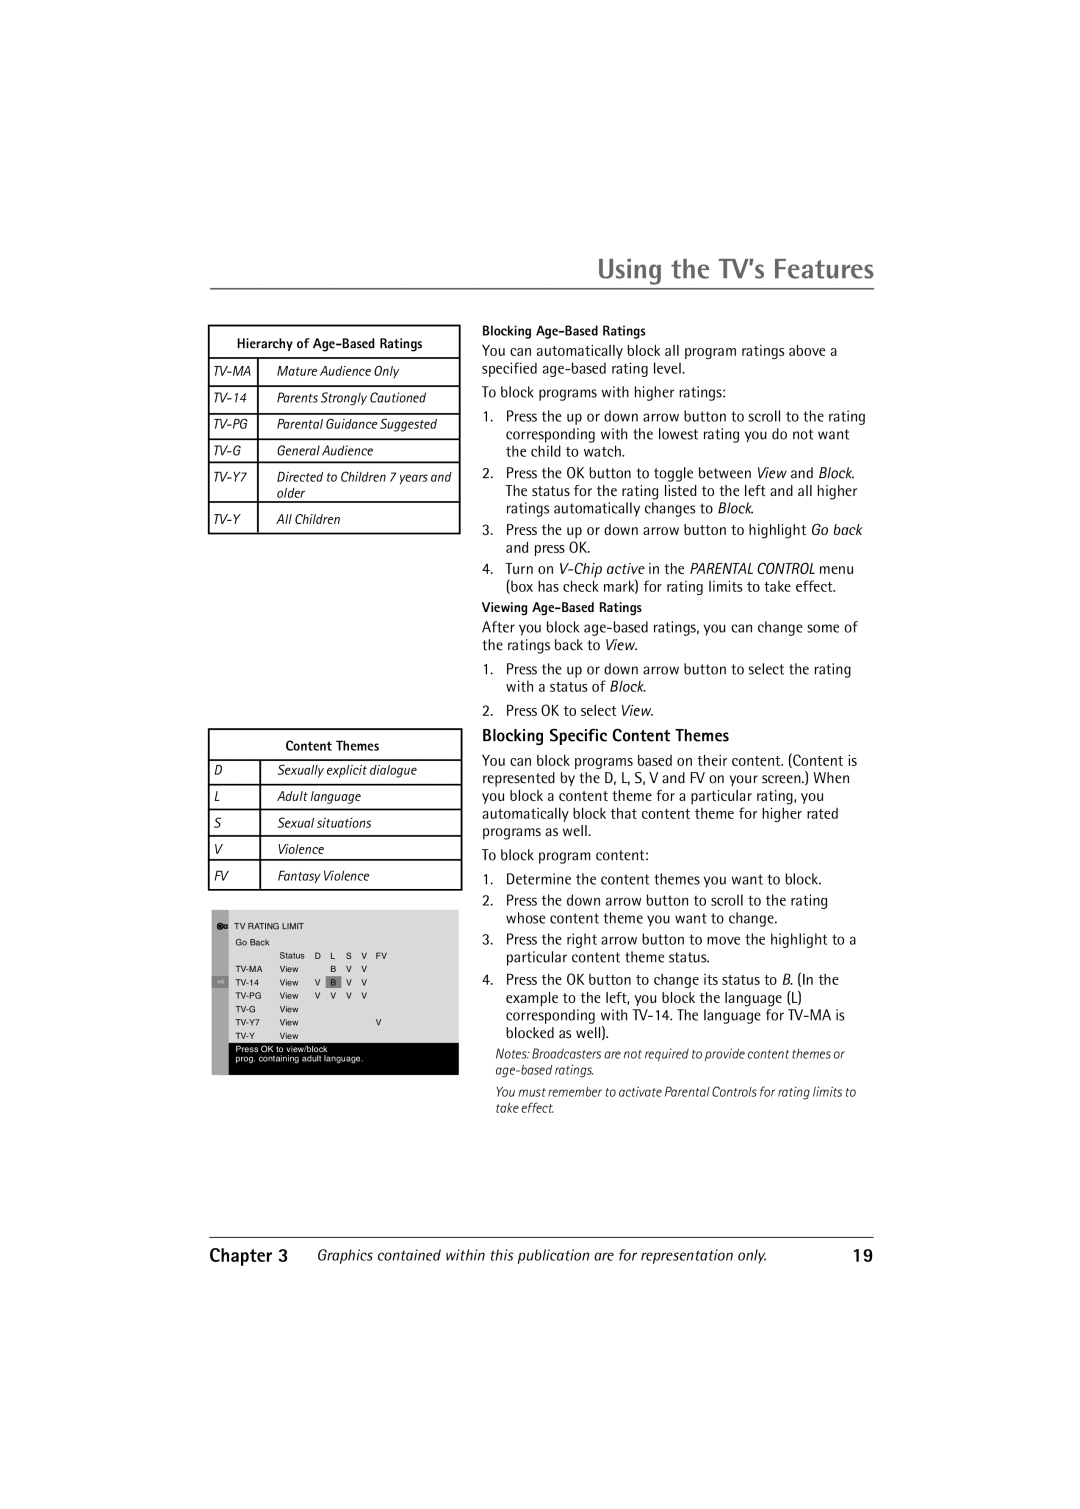 RCA 27R410T manual Using the TV’s Features, Blocking Specific Content Themes, Chapter 